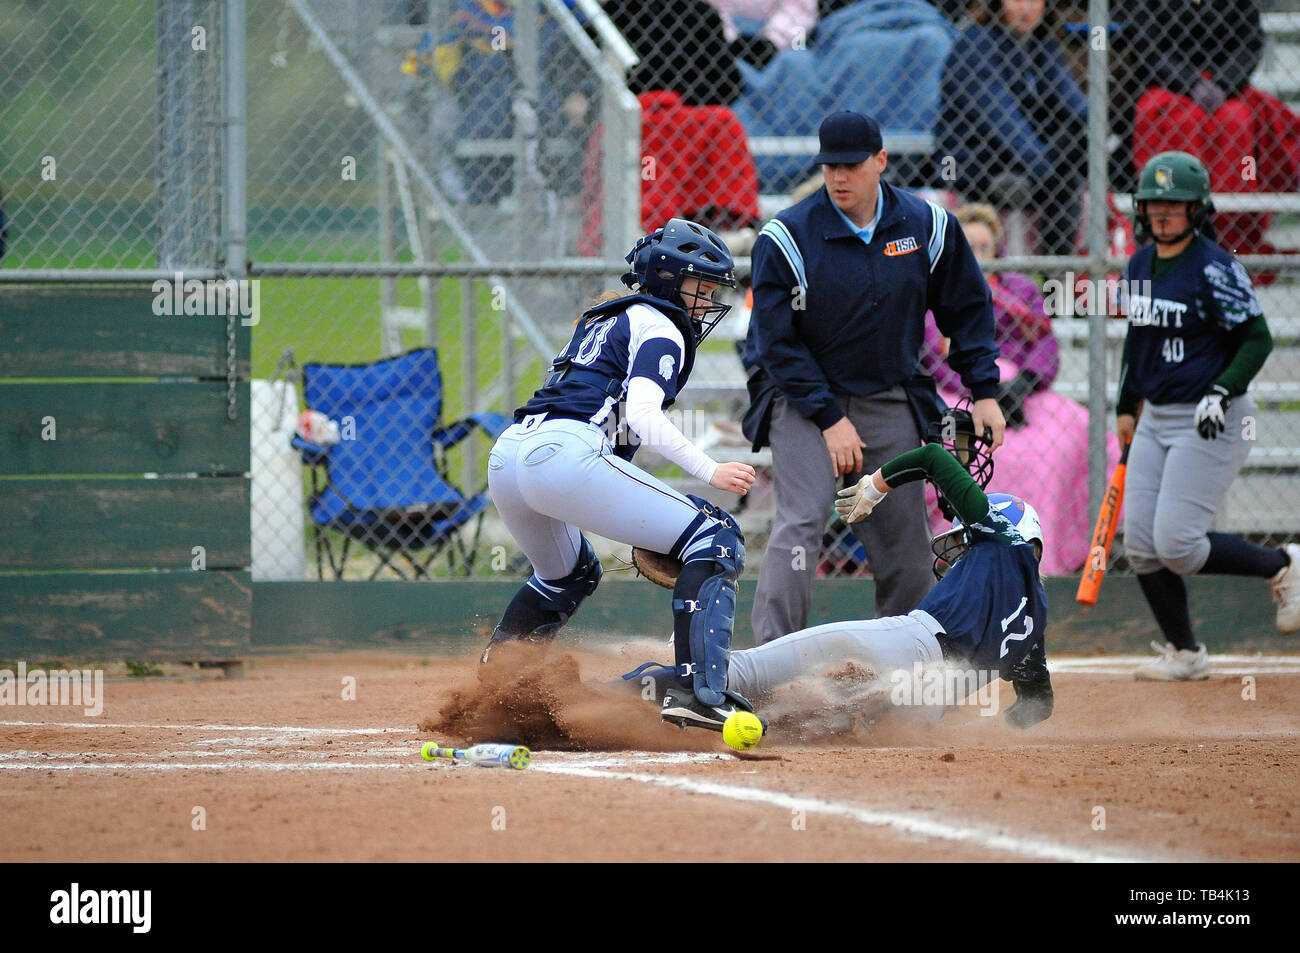 Runner slides in safely to the plate as throw from home was wild and eluded the catcher. USA. Stock Photo